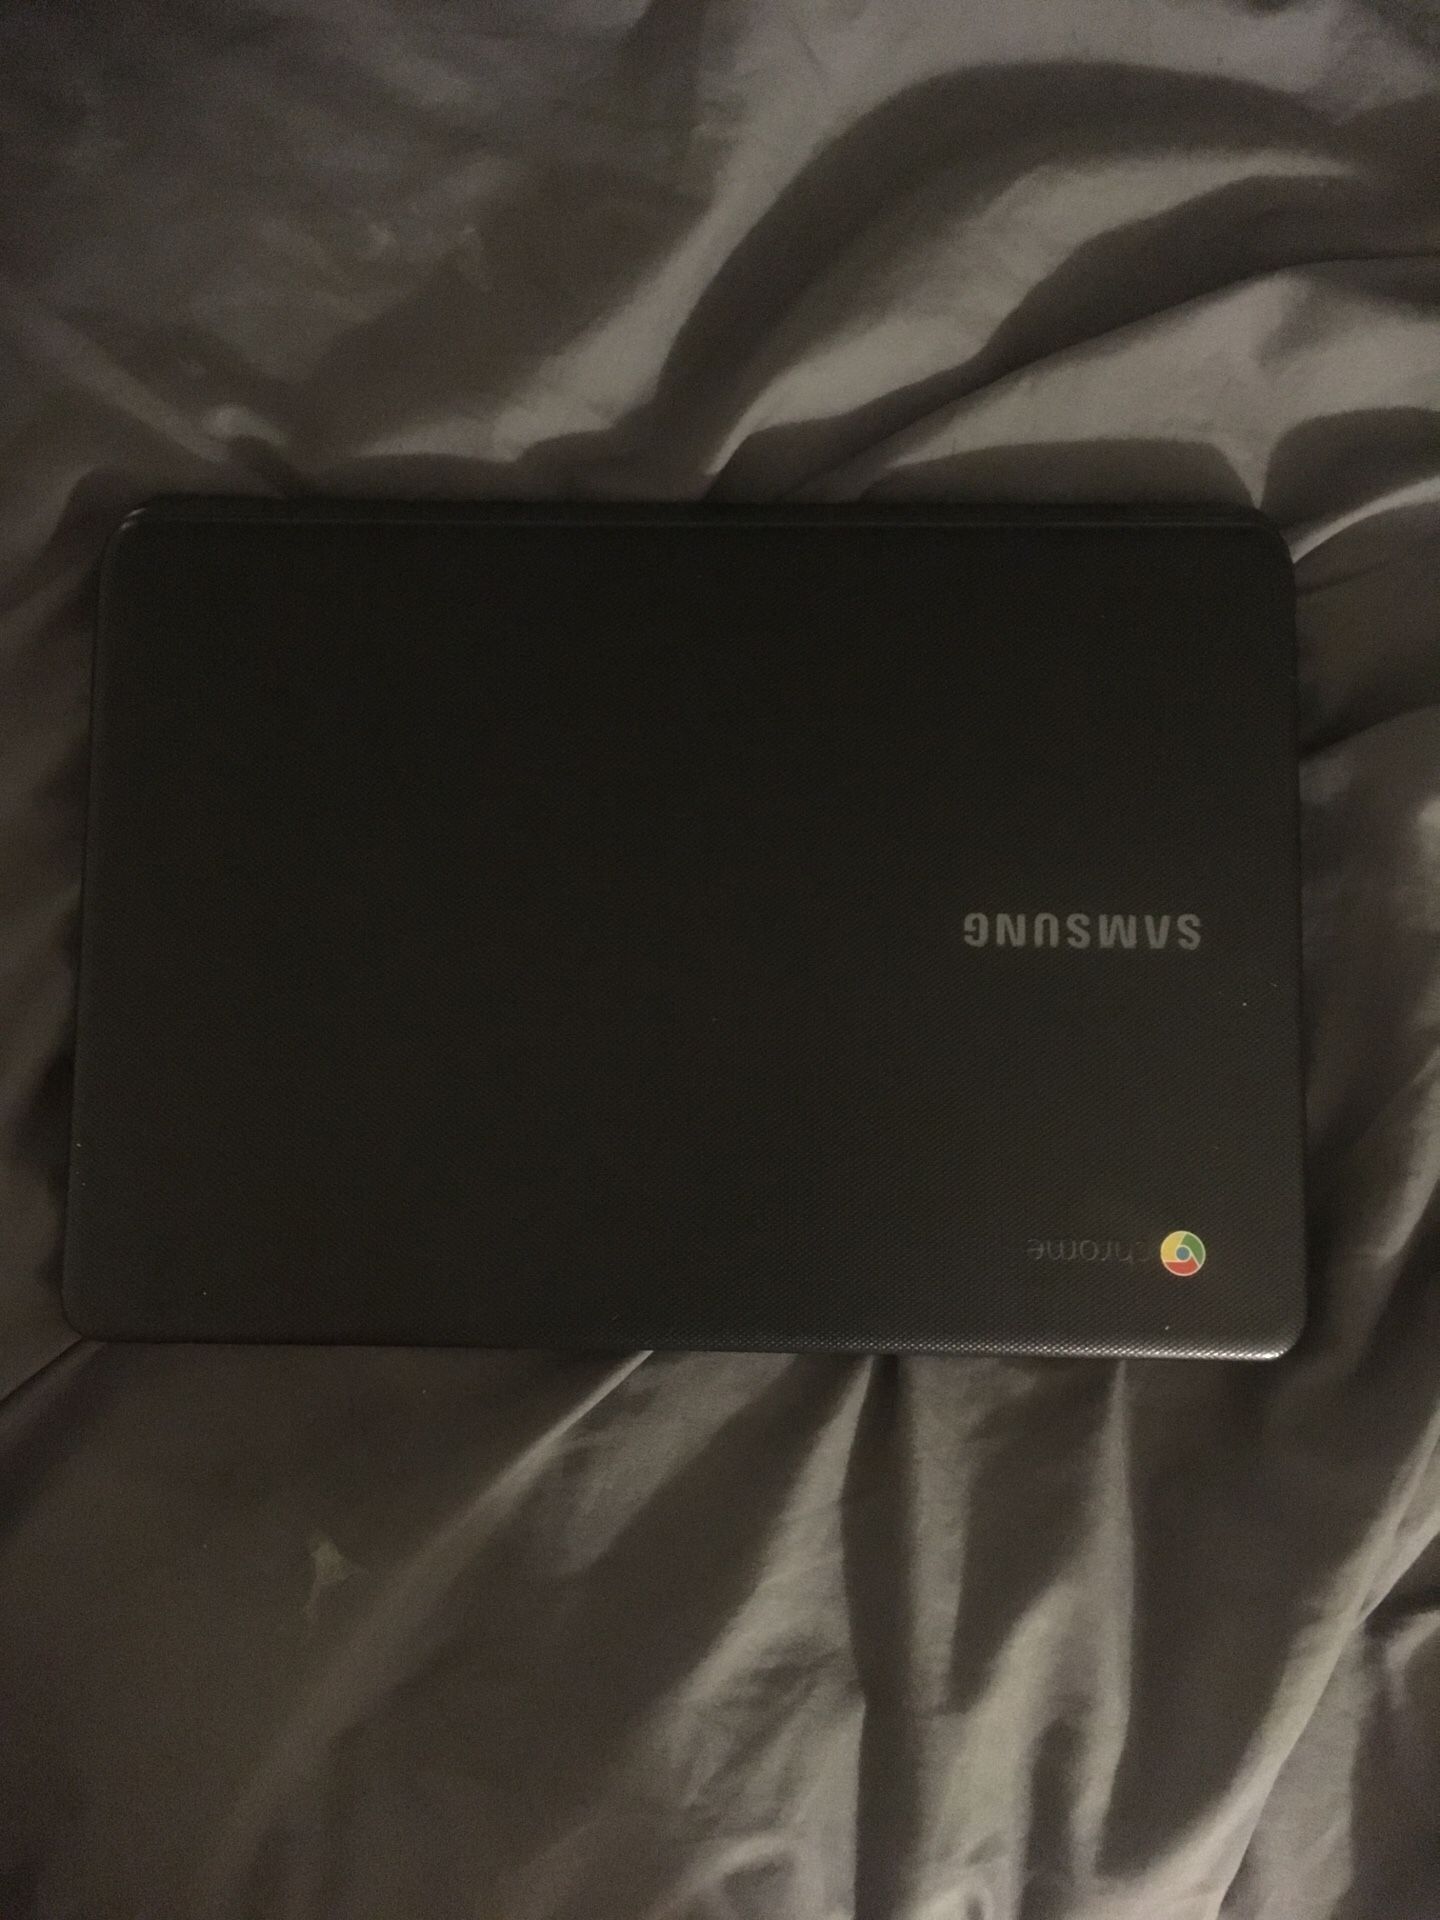 chromebook 2 years old some scratches no charger but works